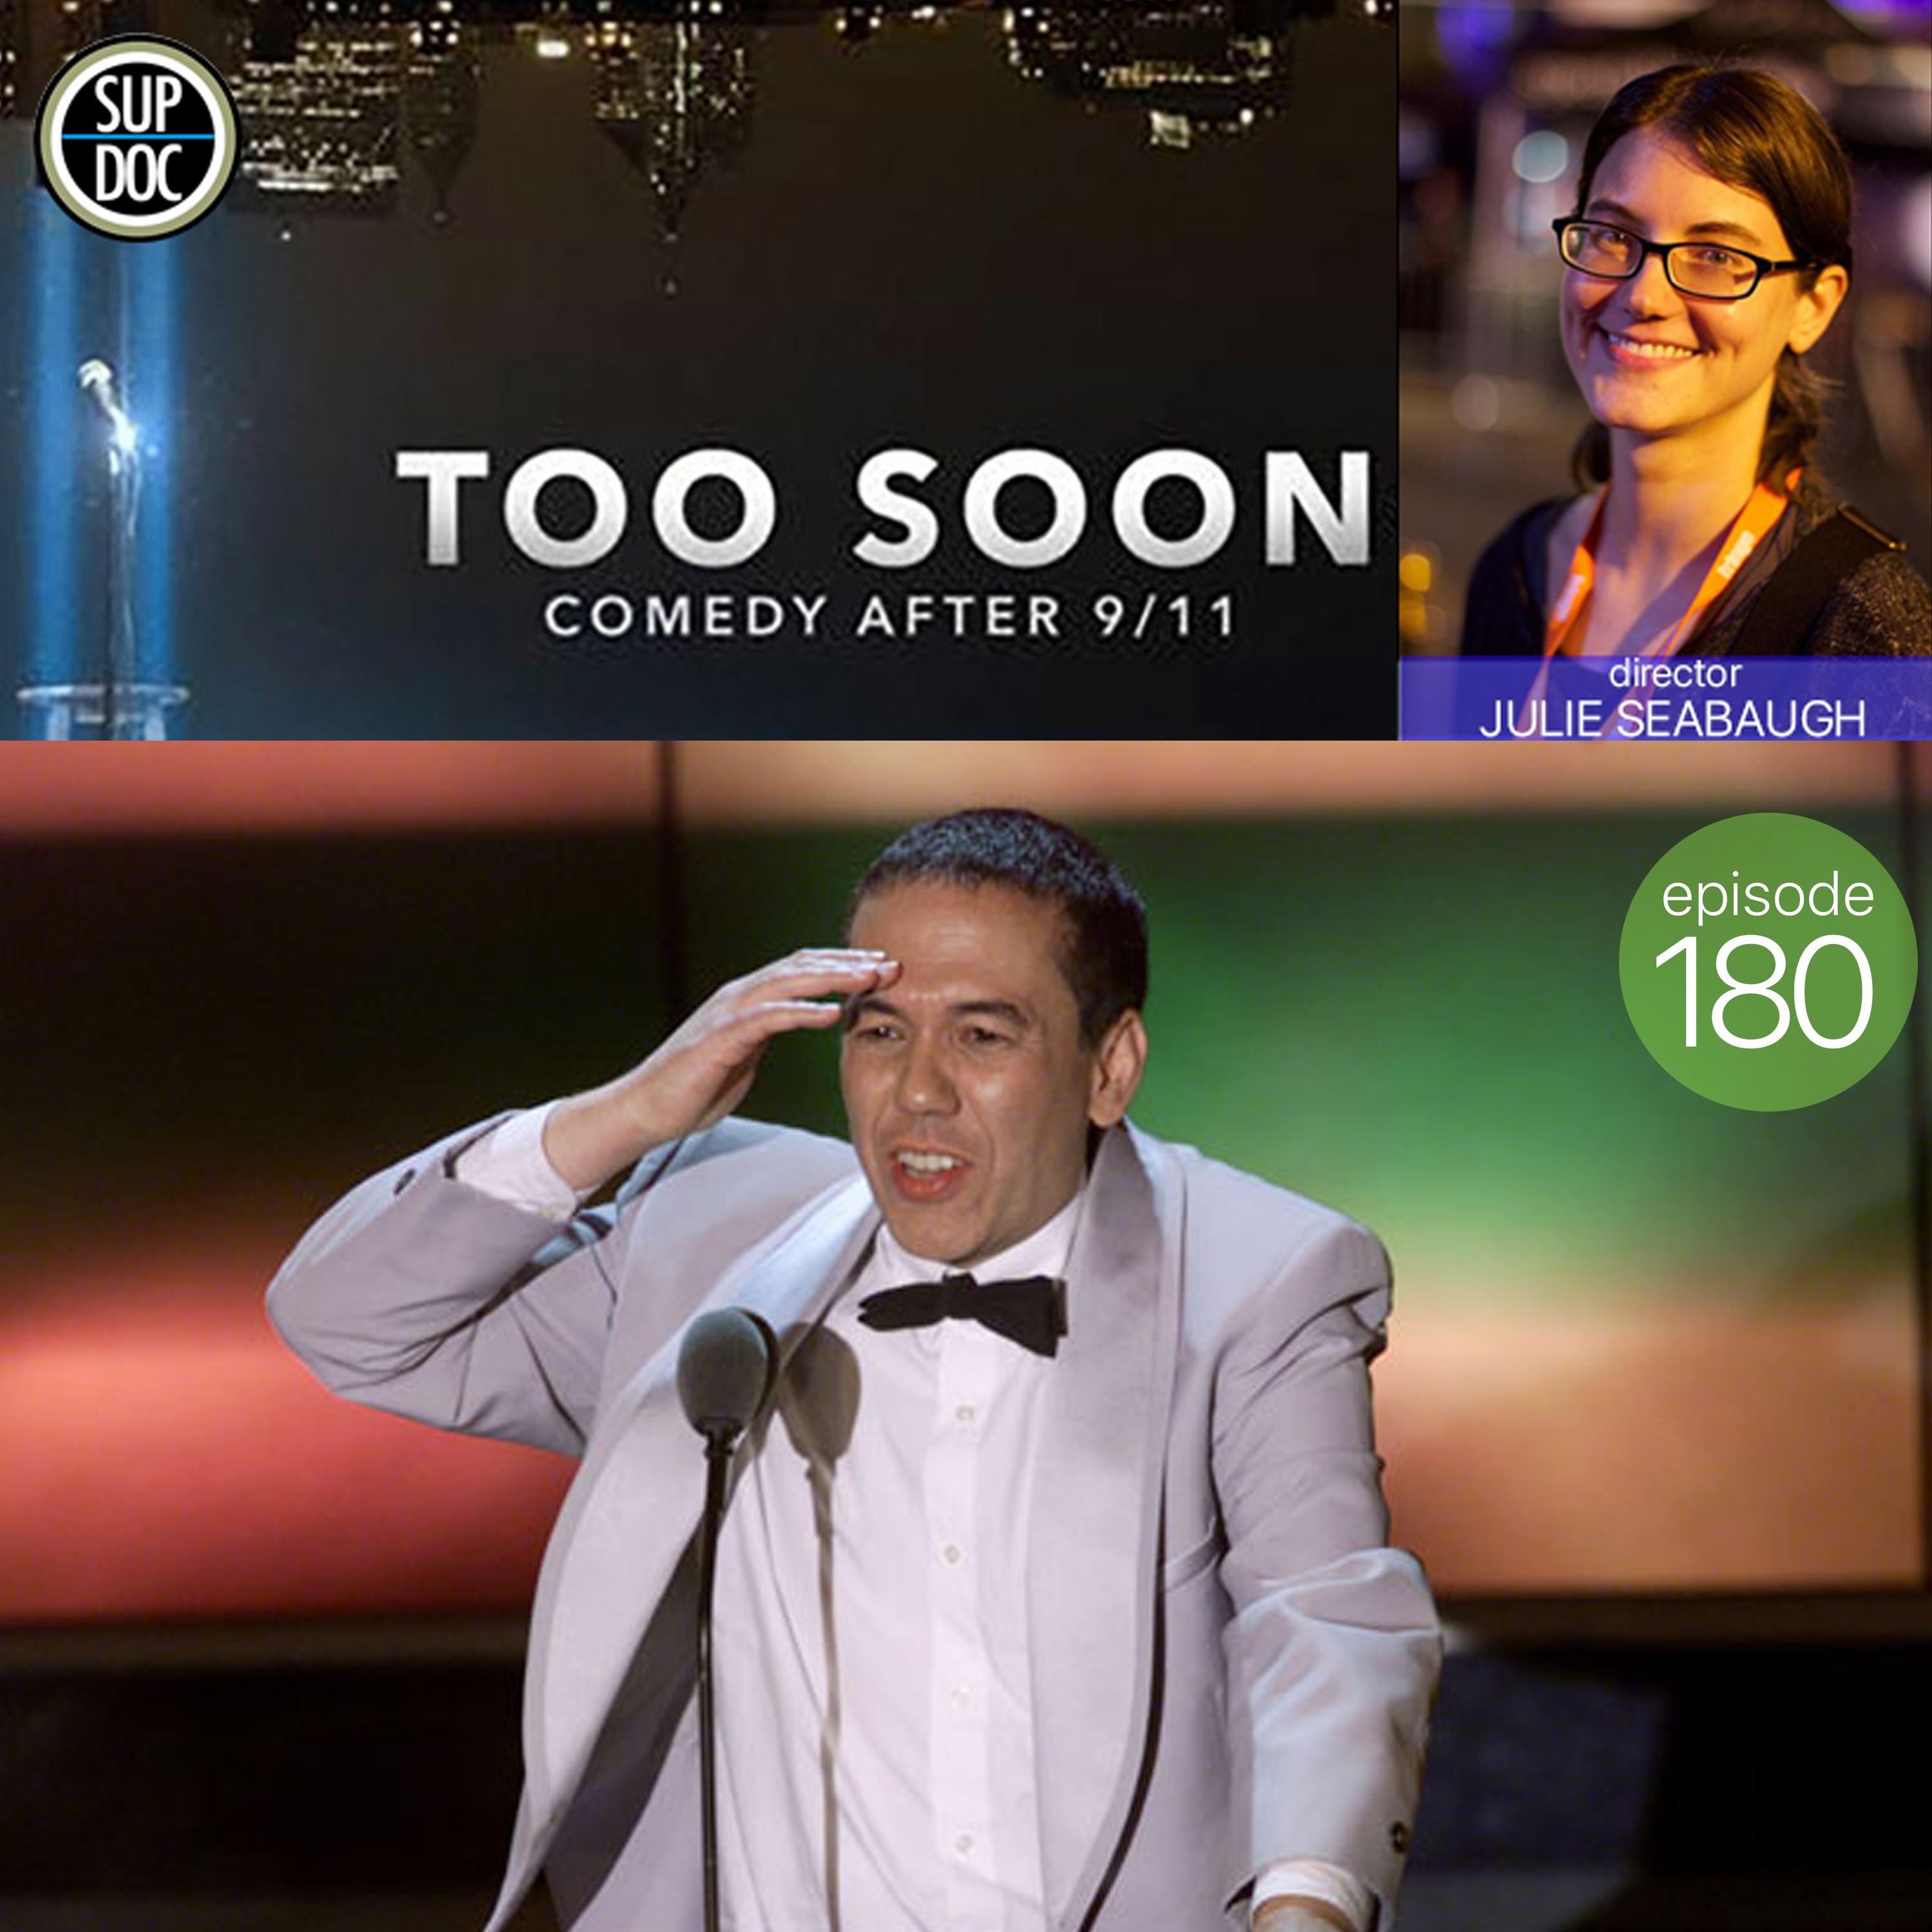 180 - TOO SOON: COMEDY AFTER 9/11 director Julie Seabaugh